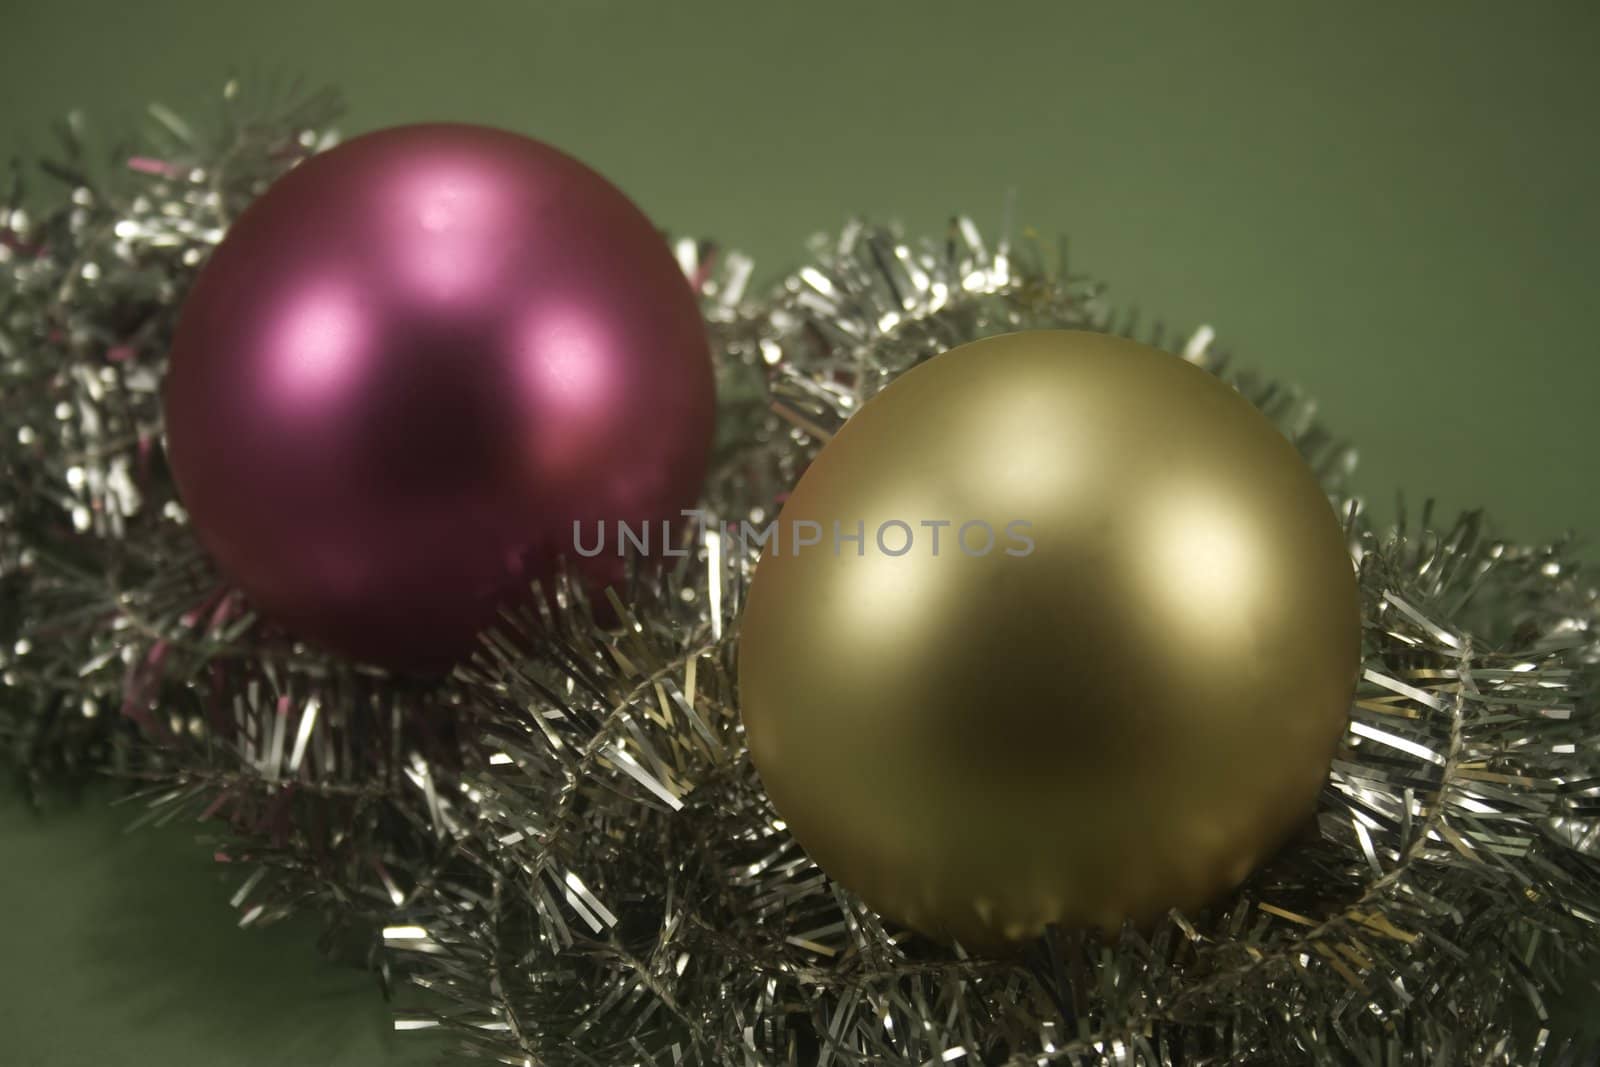 Two ornaments sitting on tinsel and isolated on green paper